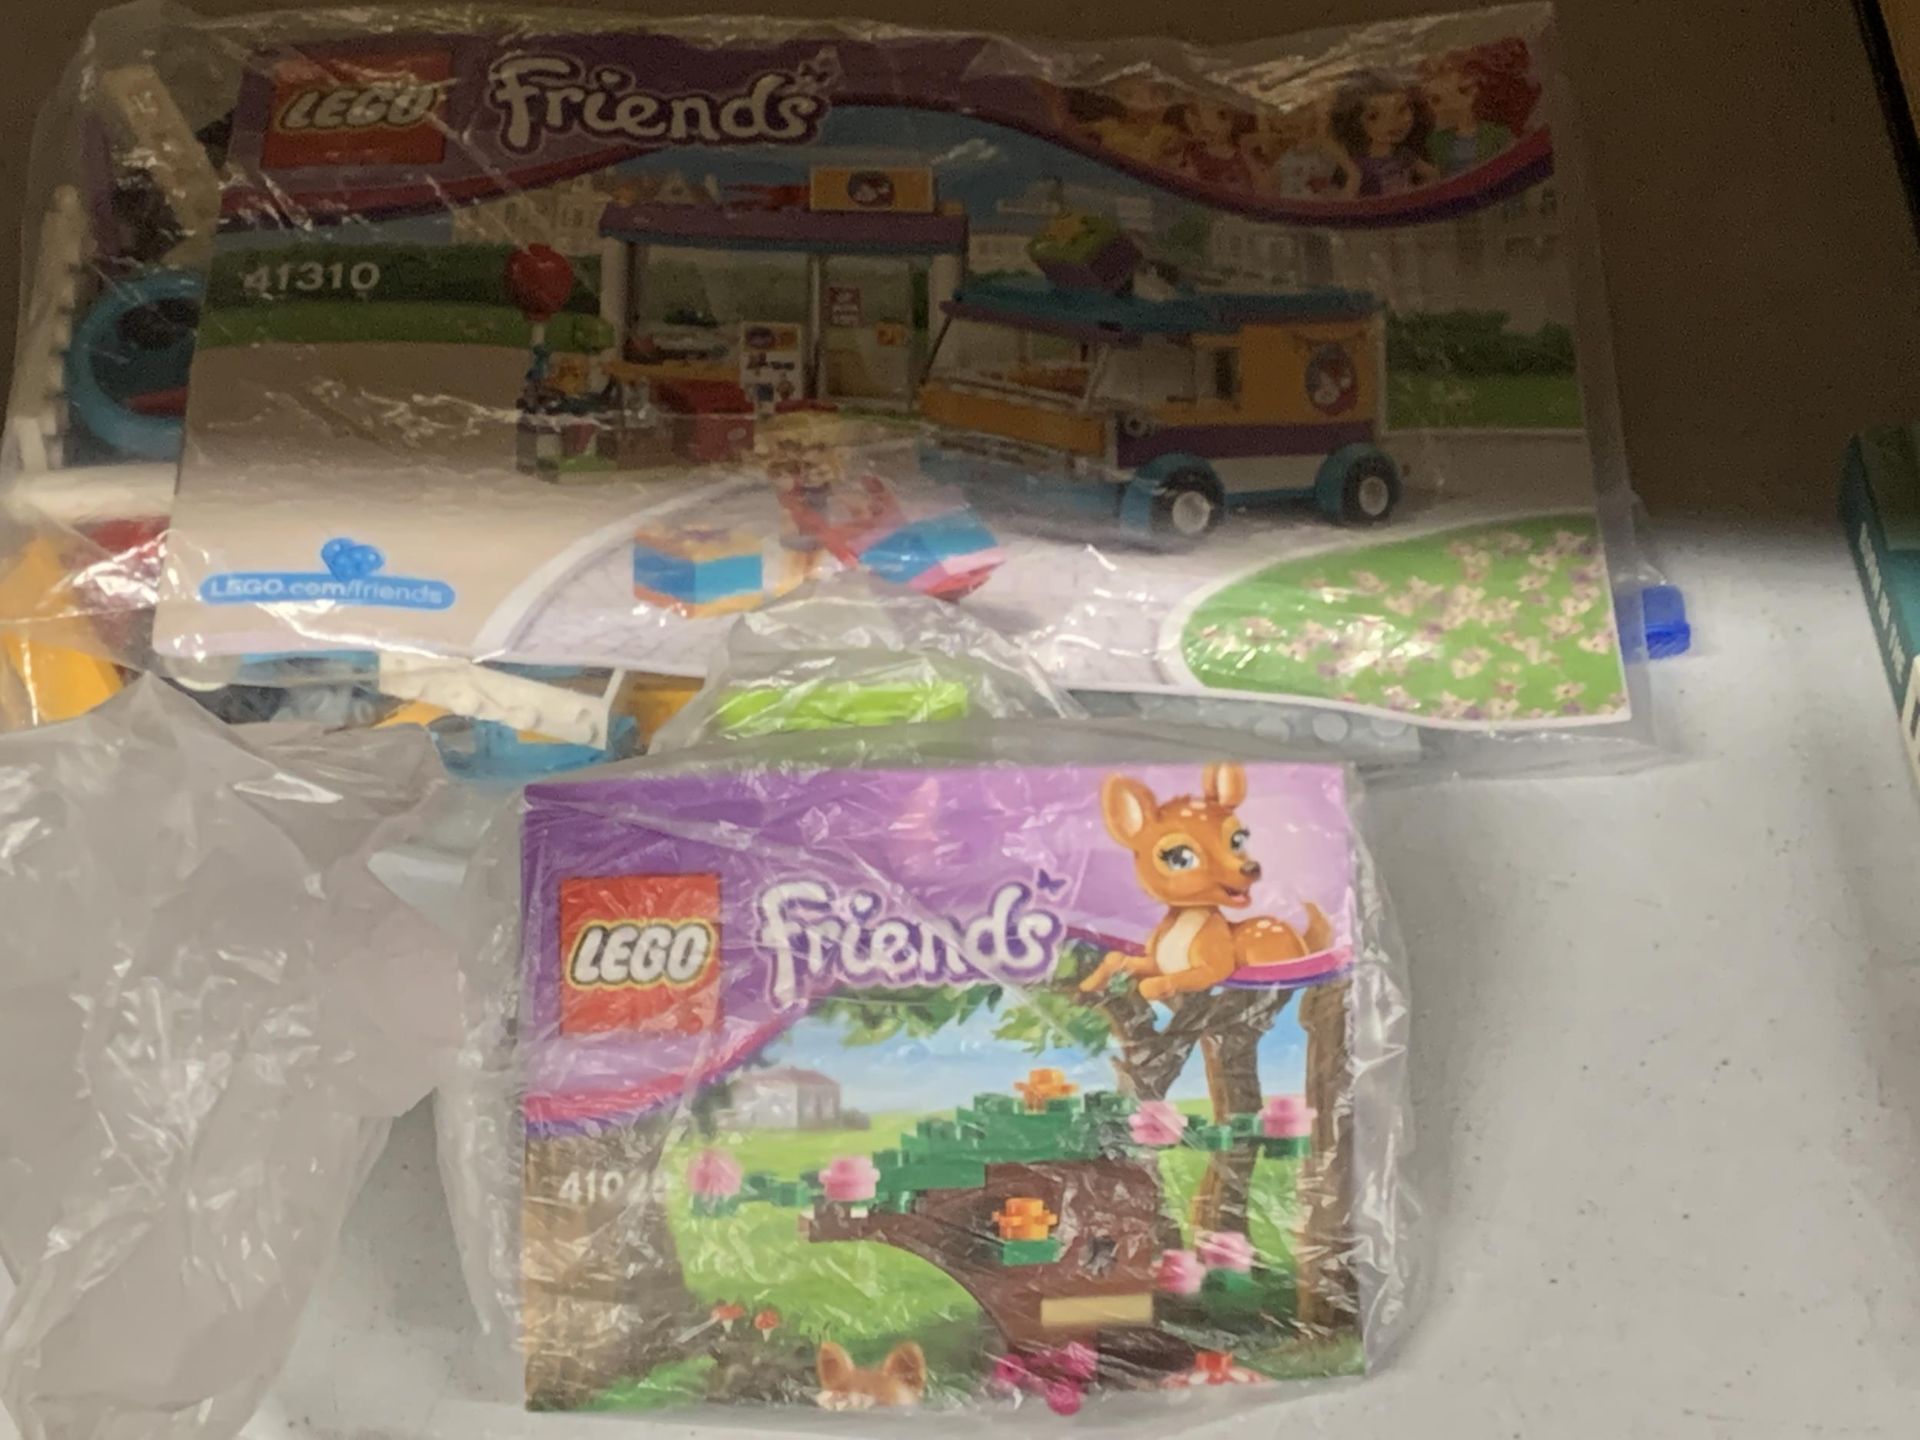 TWO LEGO FRIENDS SETS NO. 41310 AND 41023